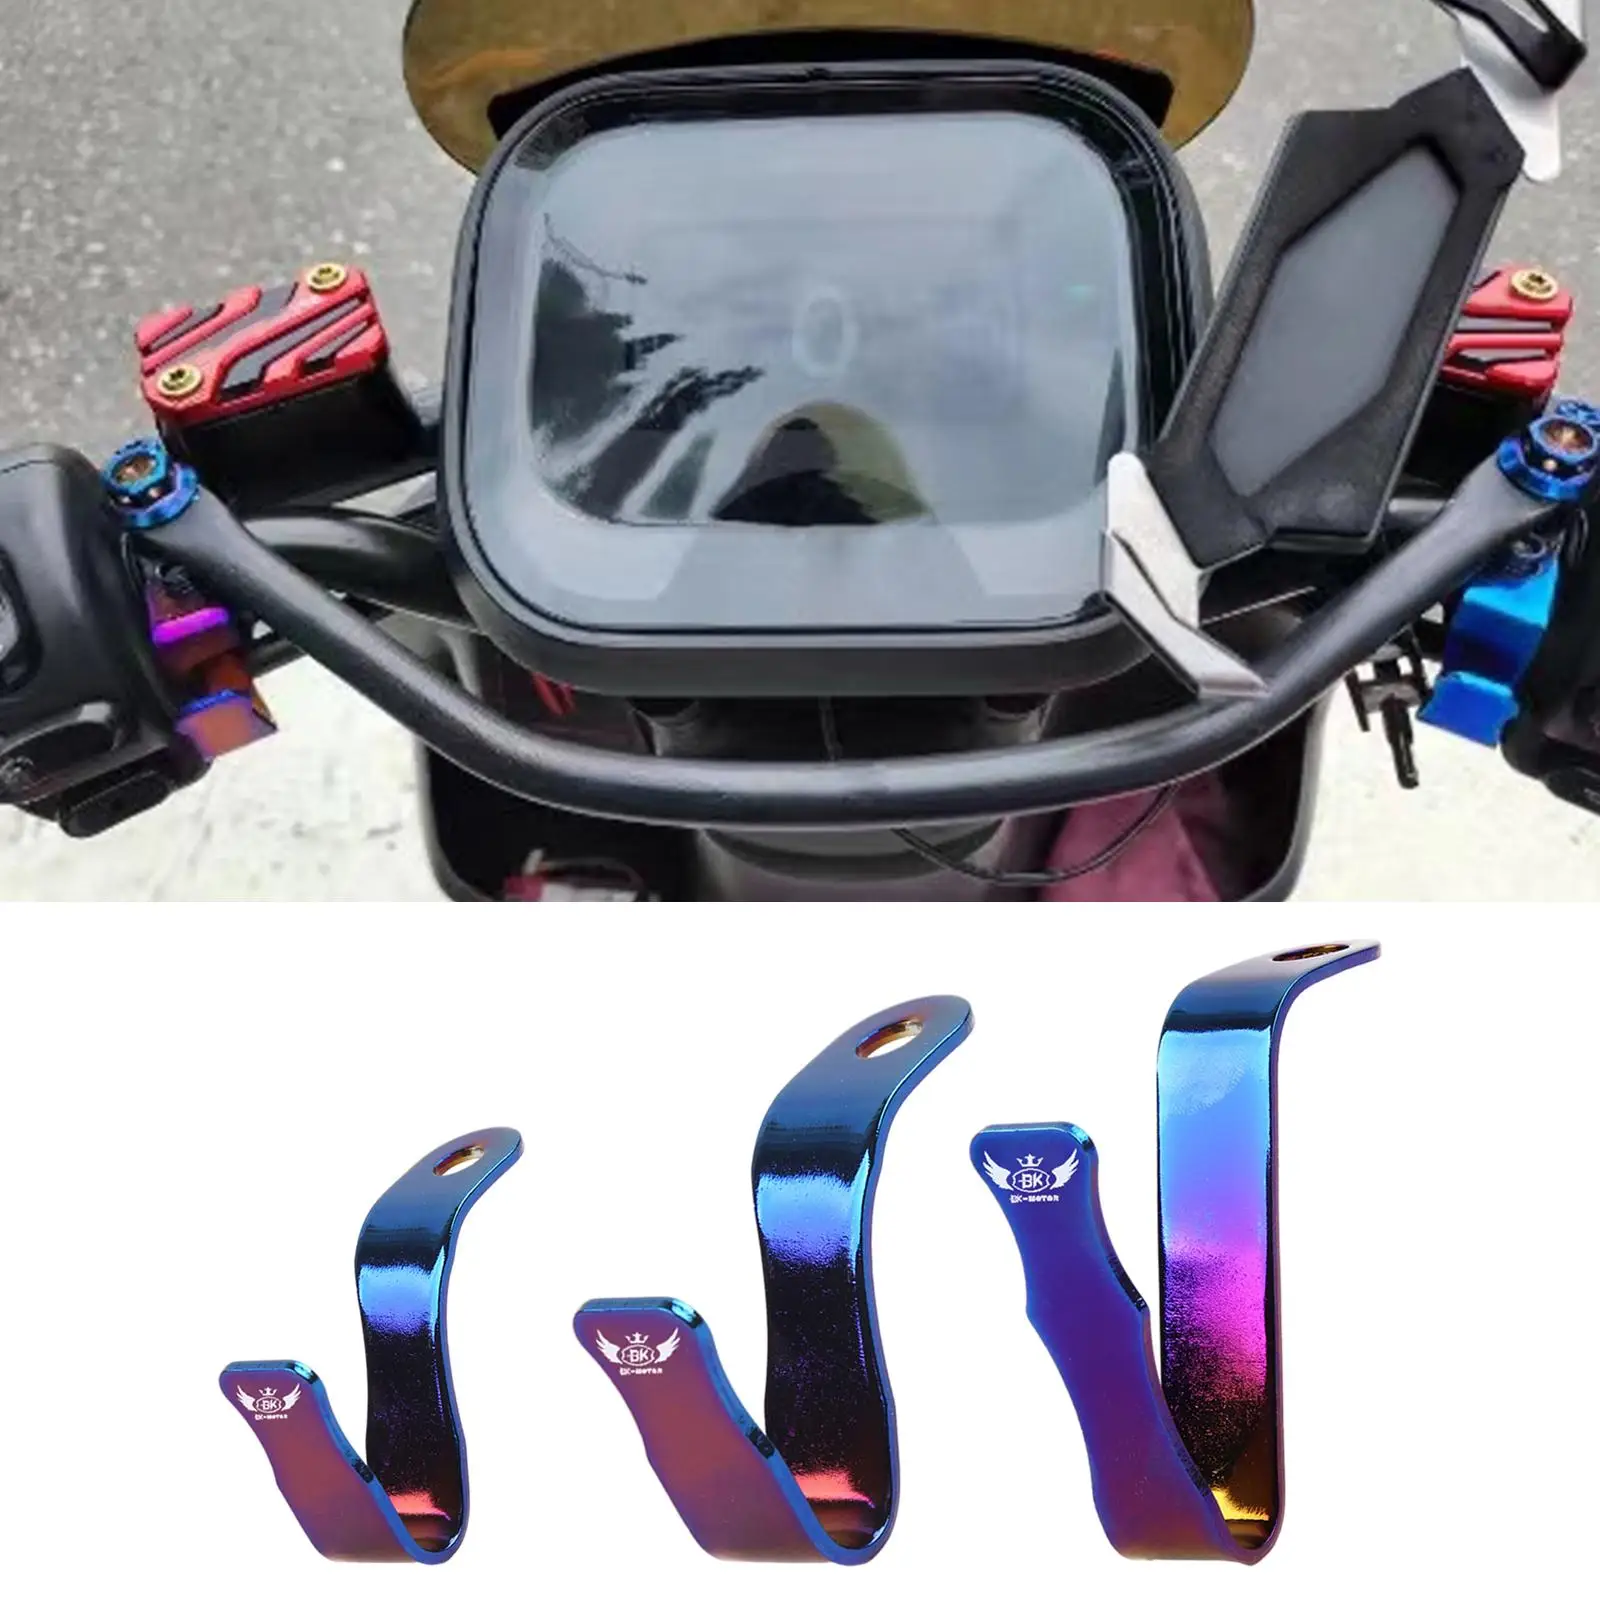 Motorcycle Helmet Rack Colorful Fixed Base Accessories Titanium Alloy Holder Fit for Hat